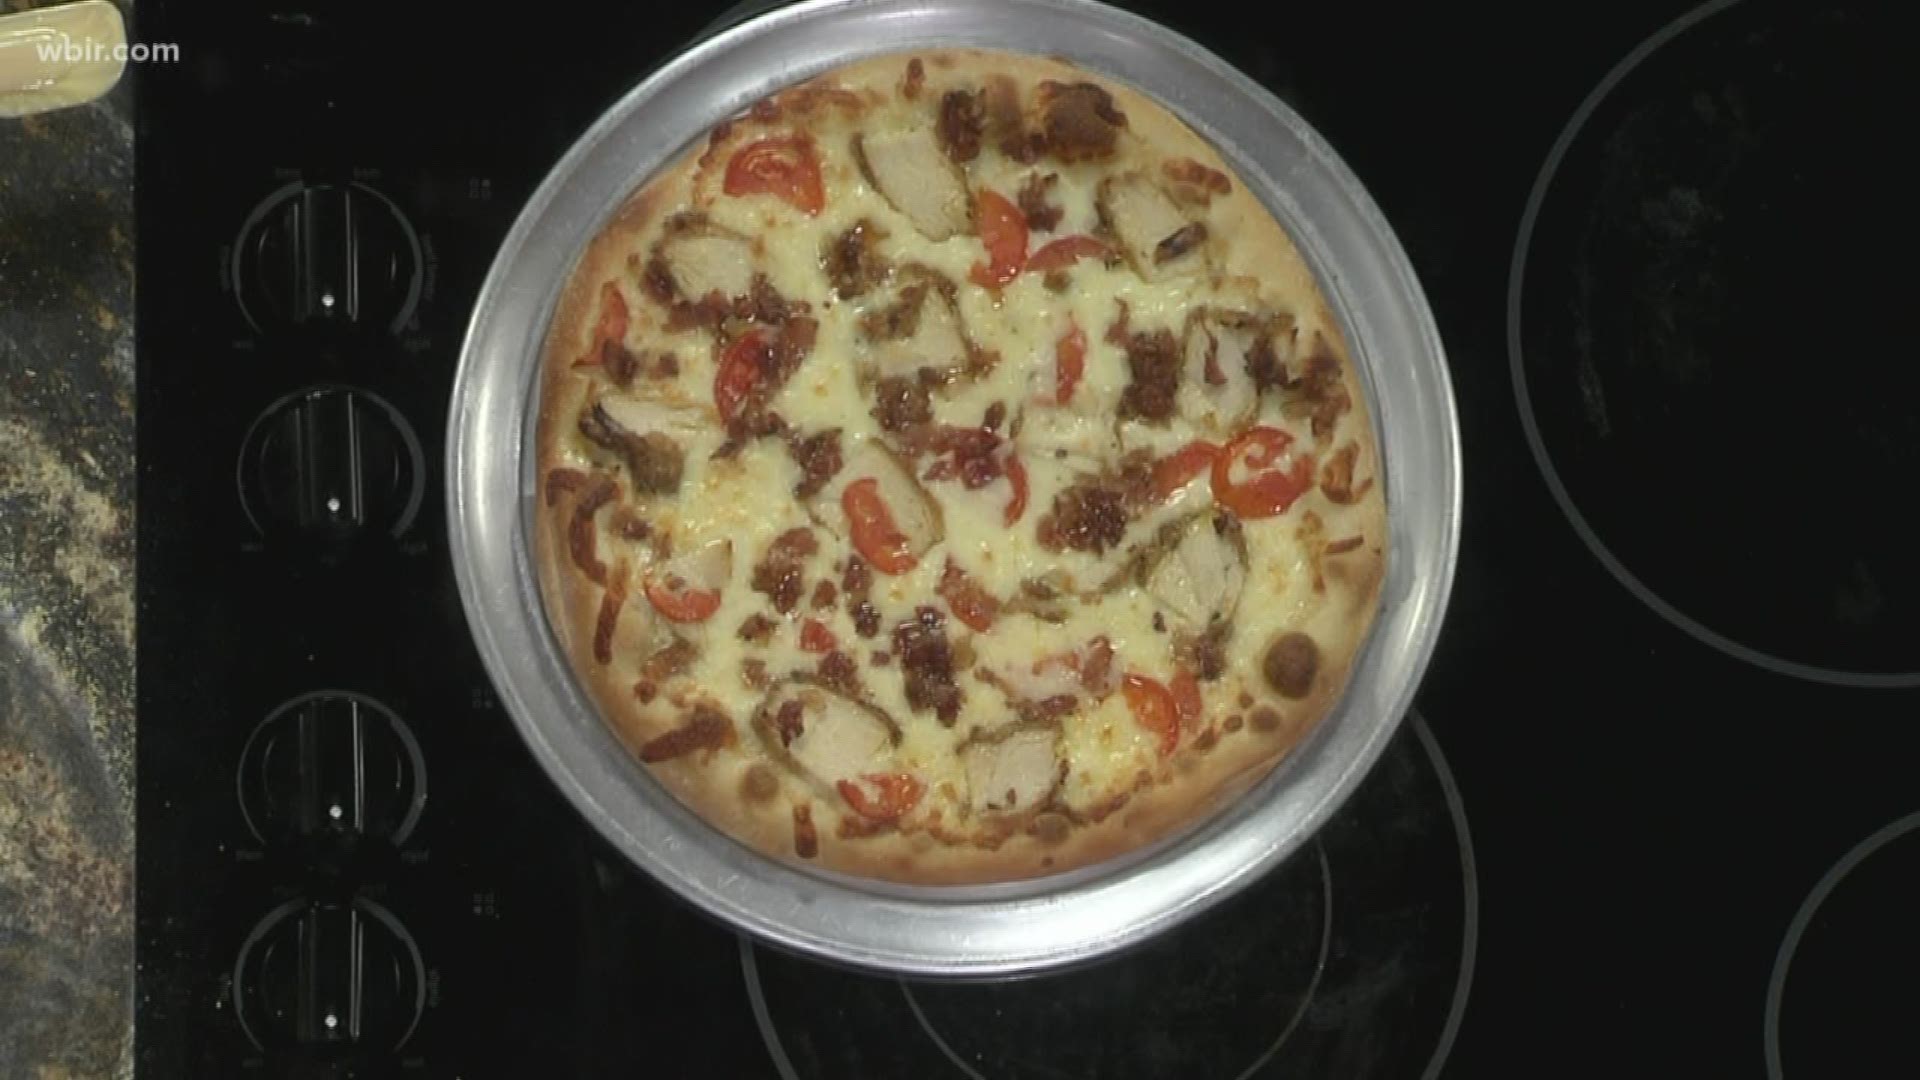 A suggestion from a customer lead to Metro Pizza's creation of a Light Garlic Buttery Chicken Pizza. Metro Pizza is located at 1084 Hunters Crossing in Alcoa, Tennessee, mmmetropizza.com. Aug. 2, 2019-4pm.